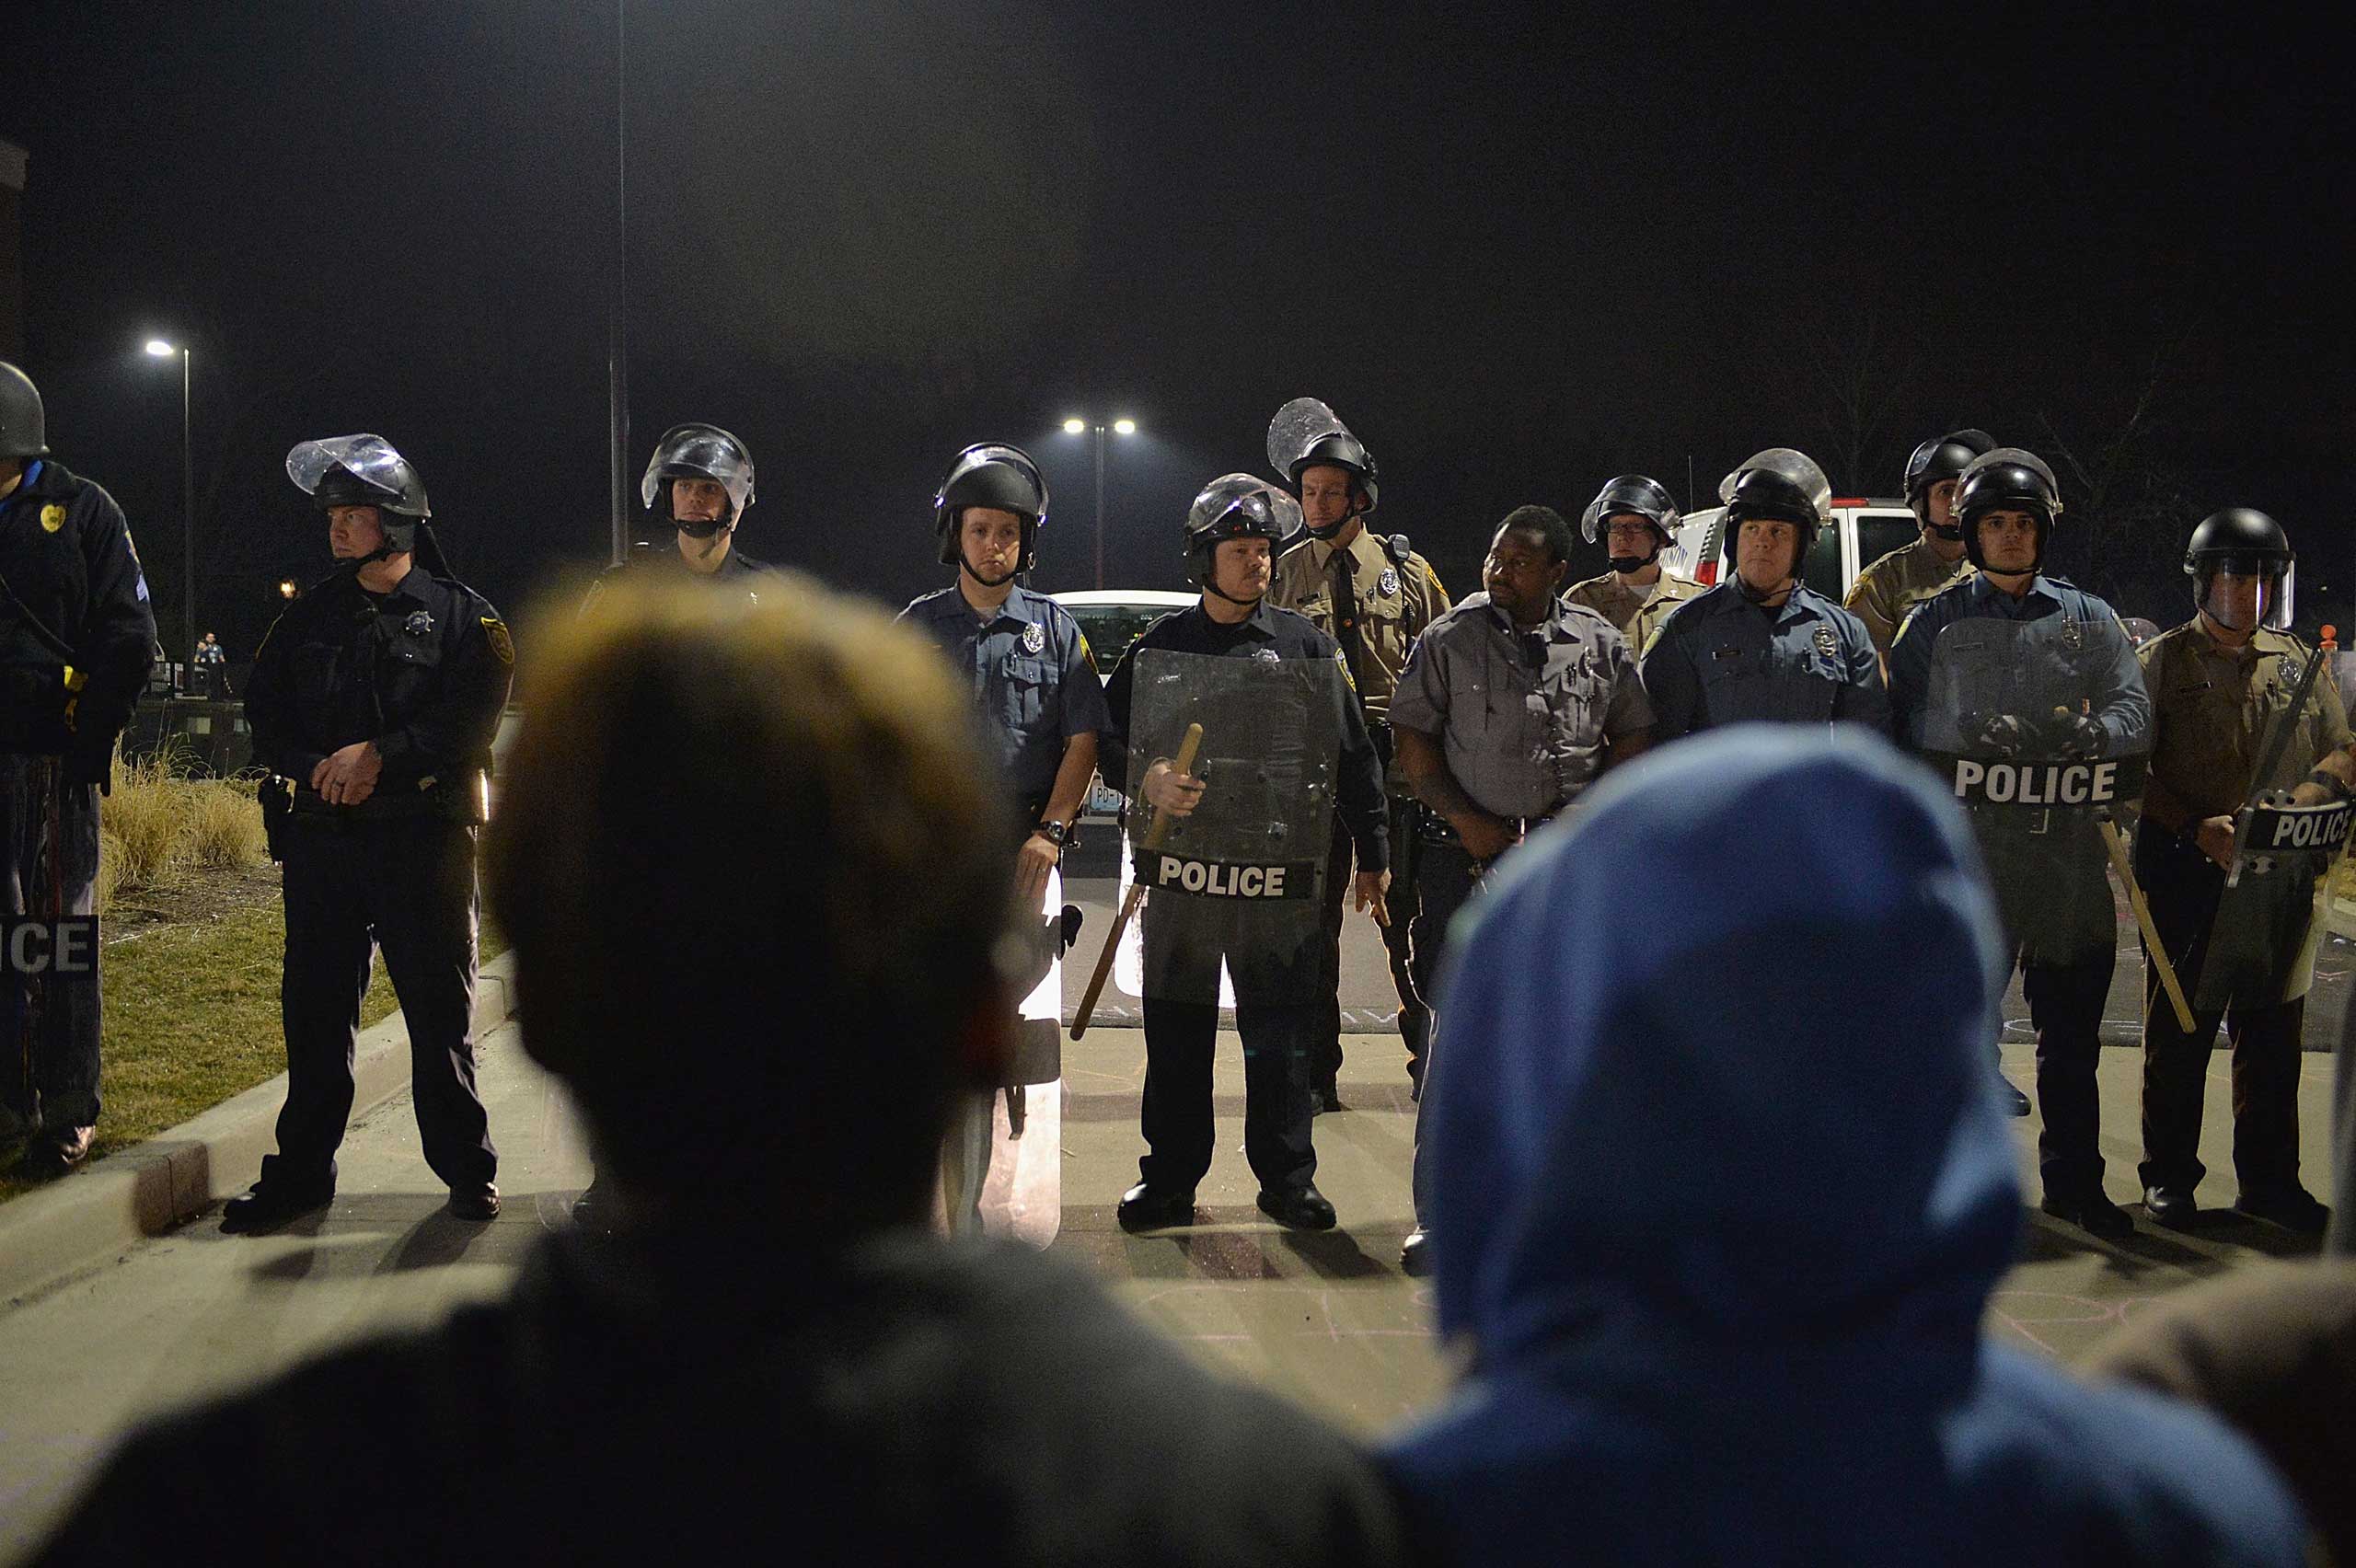 Protests errupt after Ferguson Mayor announces resignation of city Police Chief